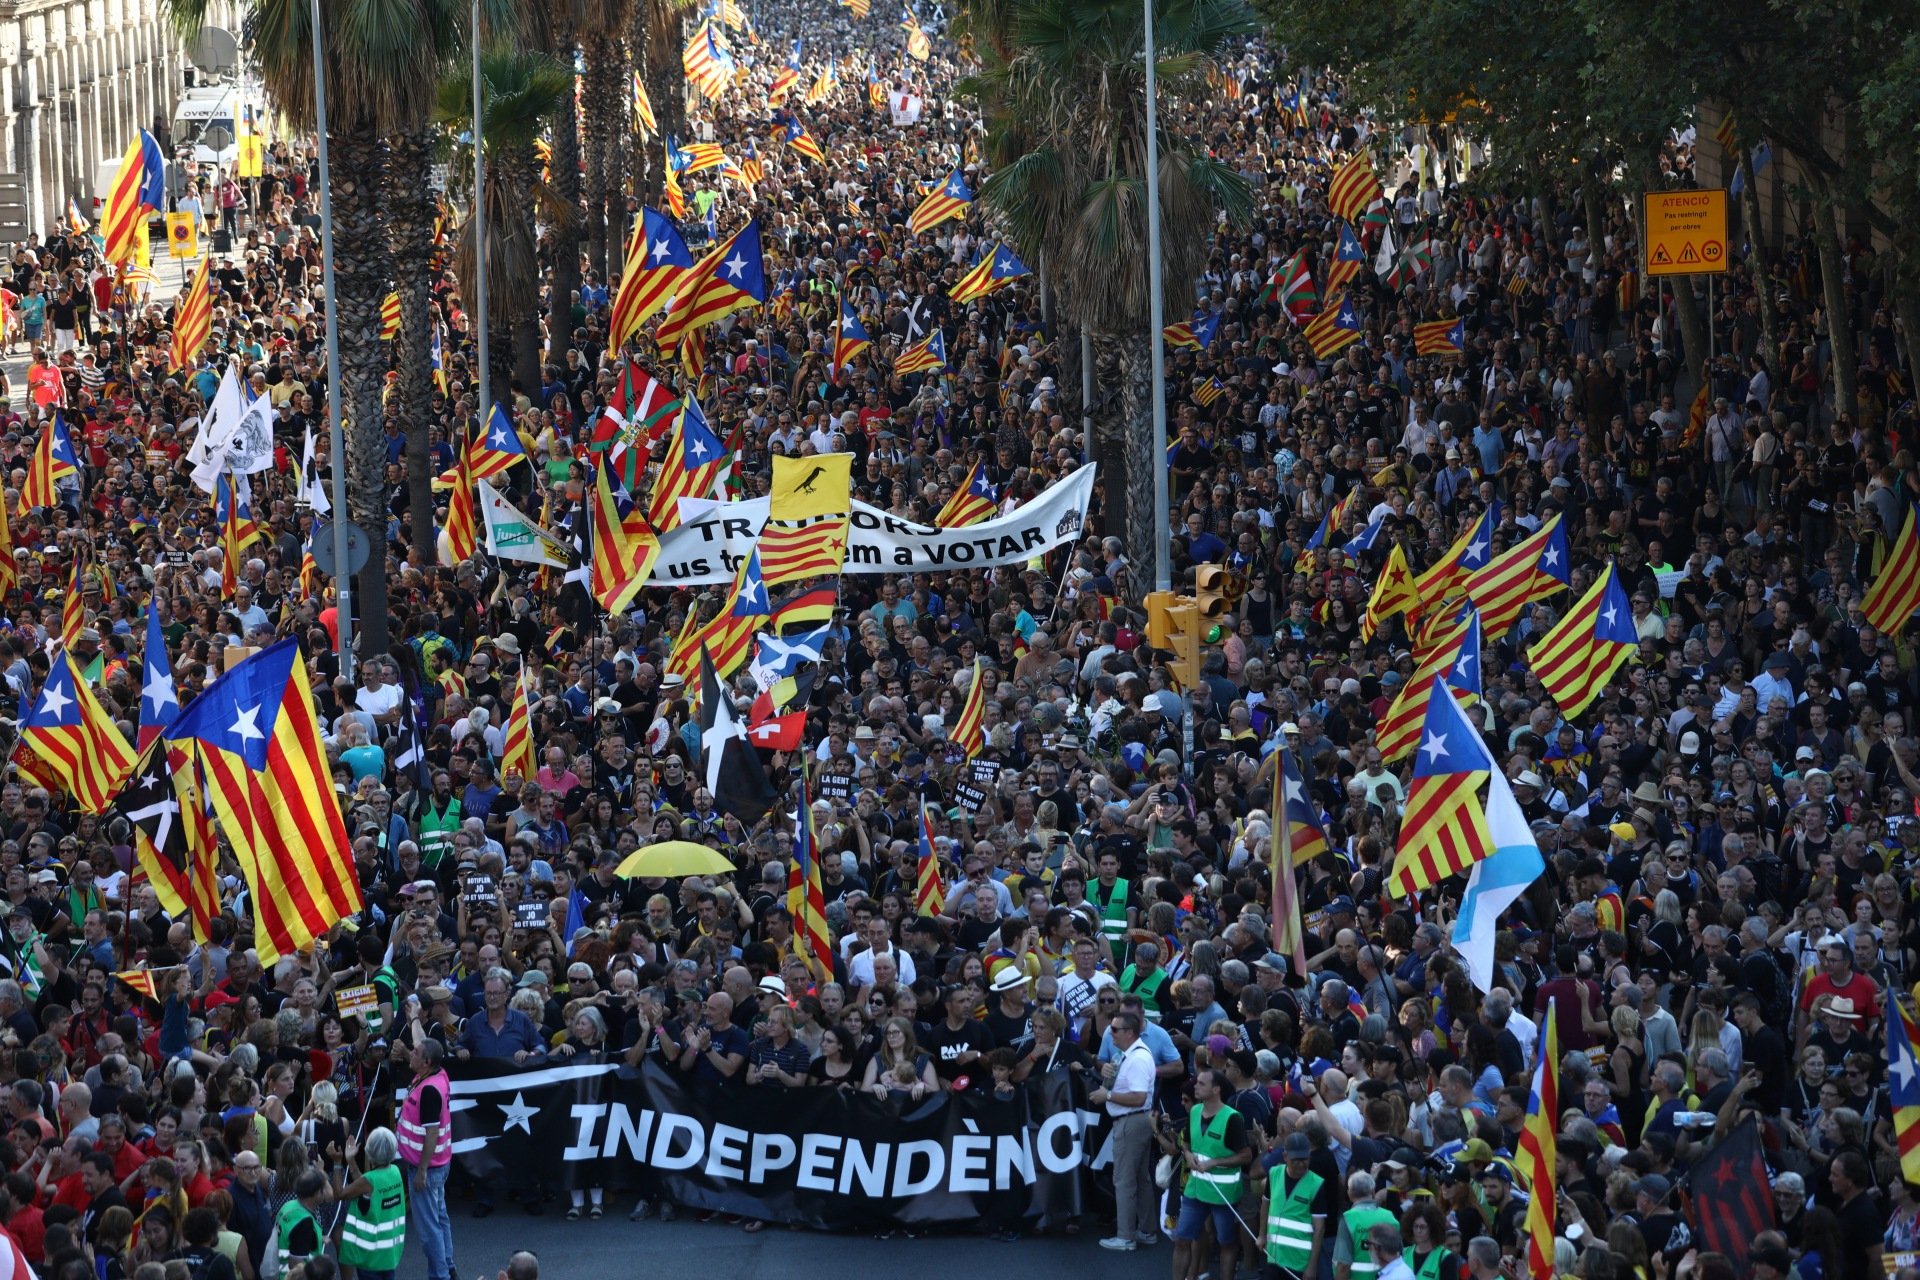 The Barcelona police figures for the Diada 2022 march turnout don't make sense